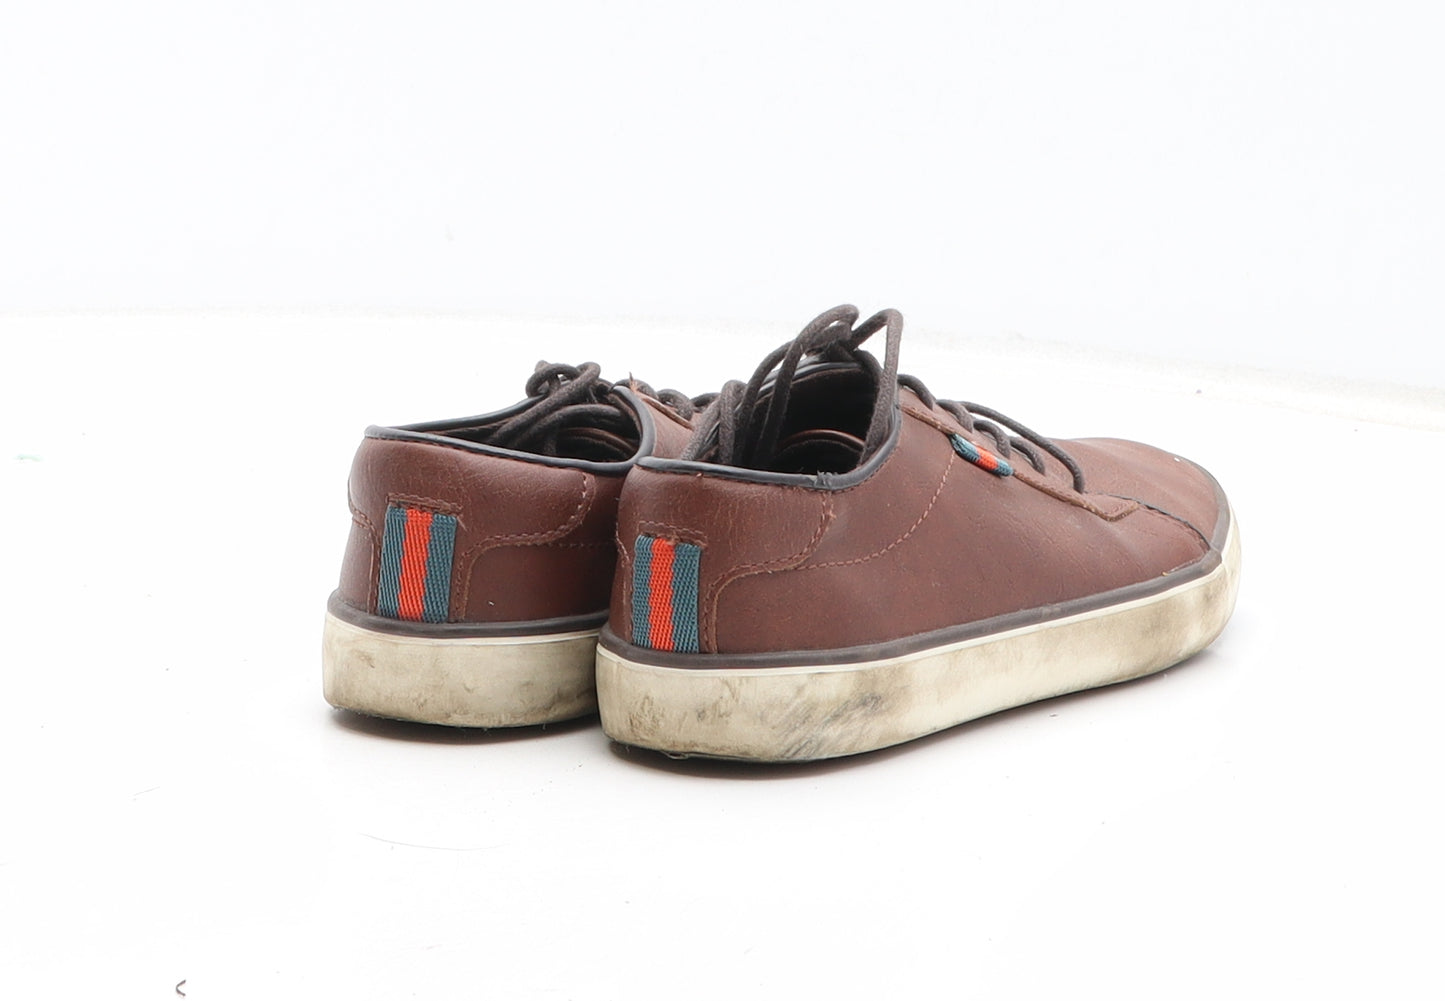 NEXT Boys Brown Synthetic Trainer Casual UK 12